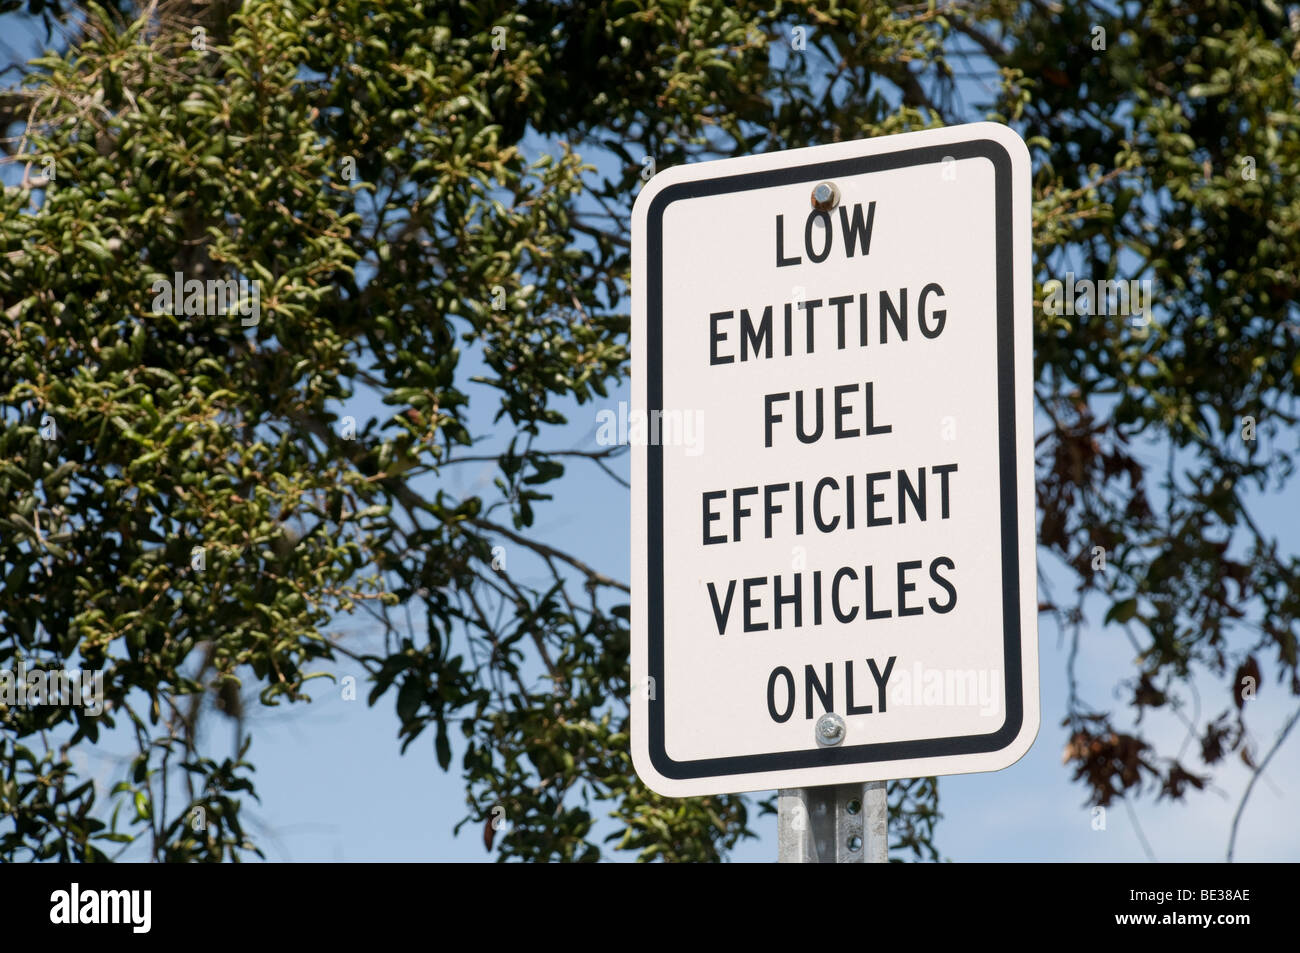 Low Emitting Fuel Parking Sign Stock Photo